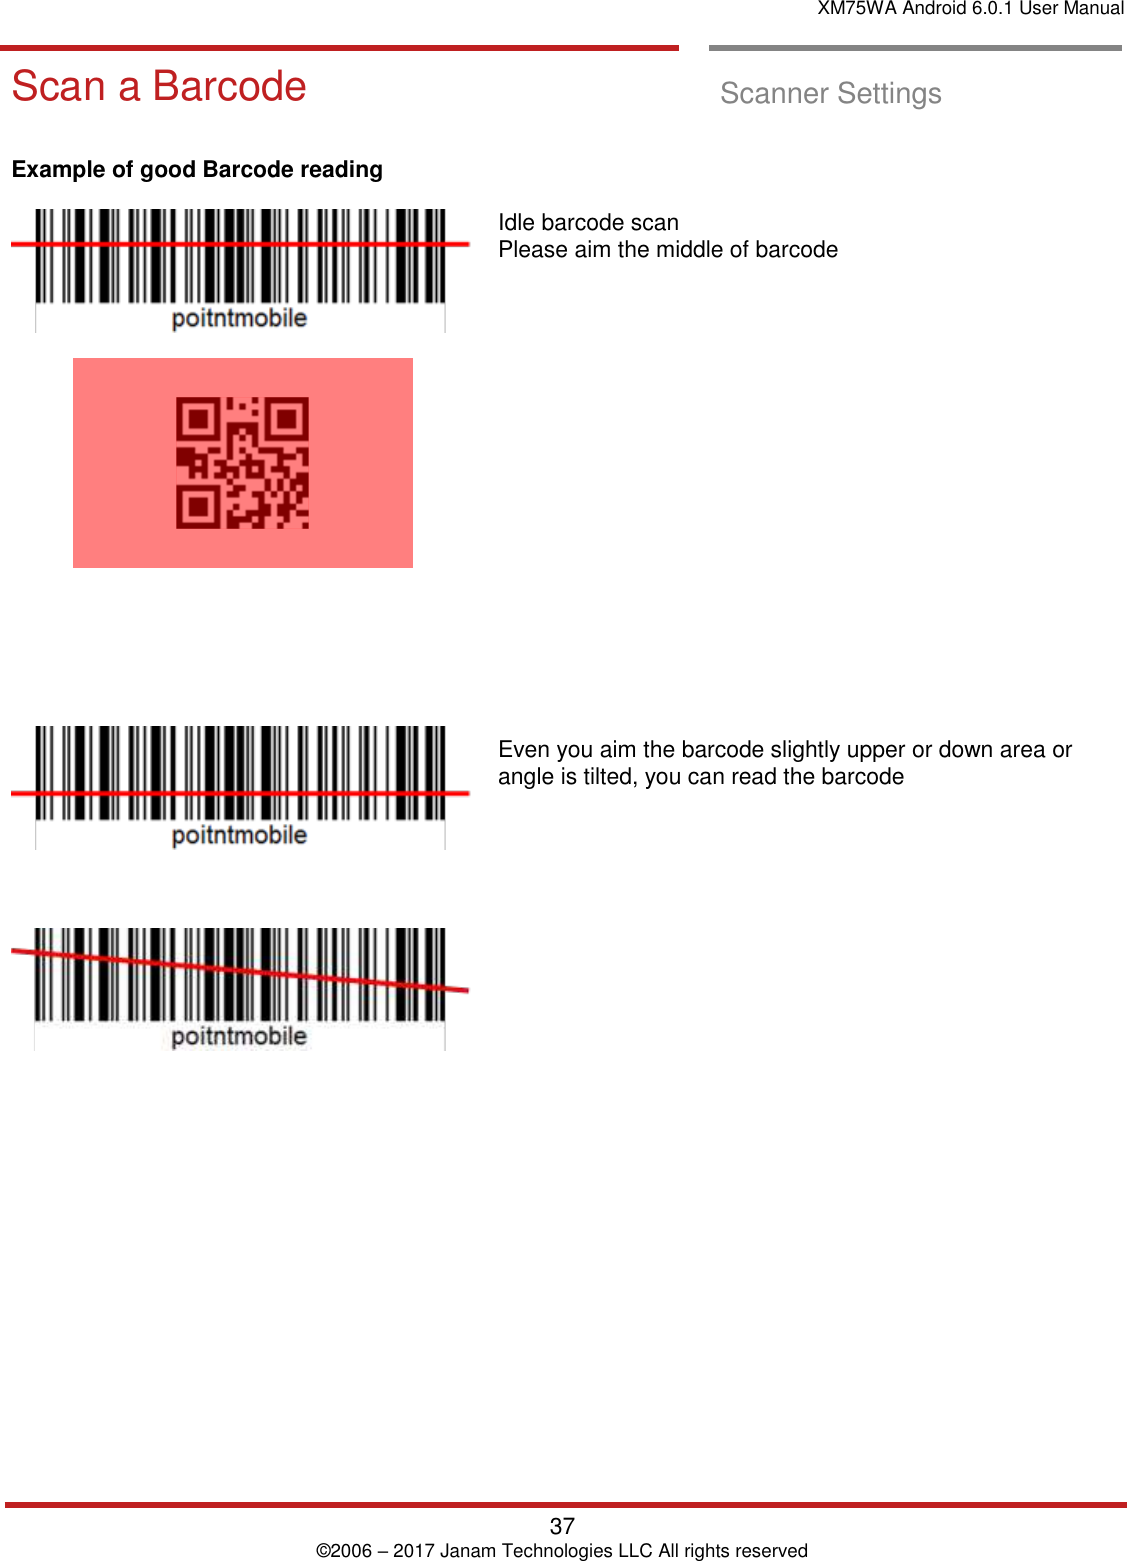 XM75WA Android 6.0.1 User Manual   37 © 2006 – 2017 Janam Technologies LLC All rights reserved  Scan a Barcode Scan a Barcode  Scanner Settings     Example of good Barcode reading                    Idle barcode scan  Please aim the middle of barcode                    Even you aim the barcode slightly upper or down area or angle is tilted, you can read the barcode            